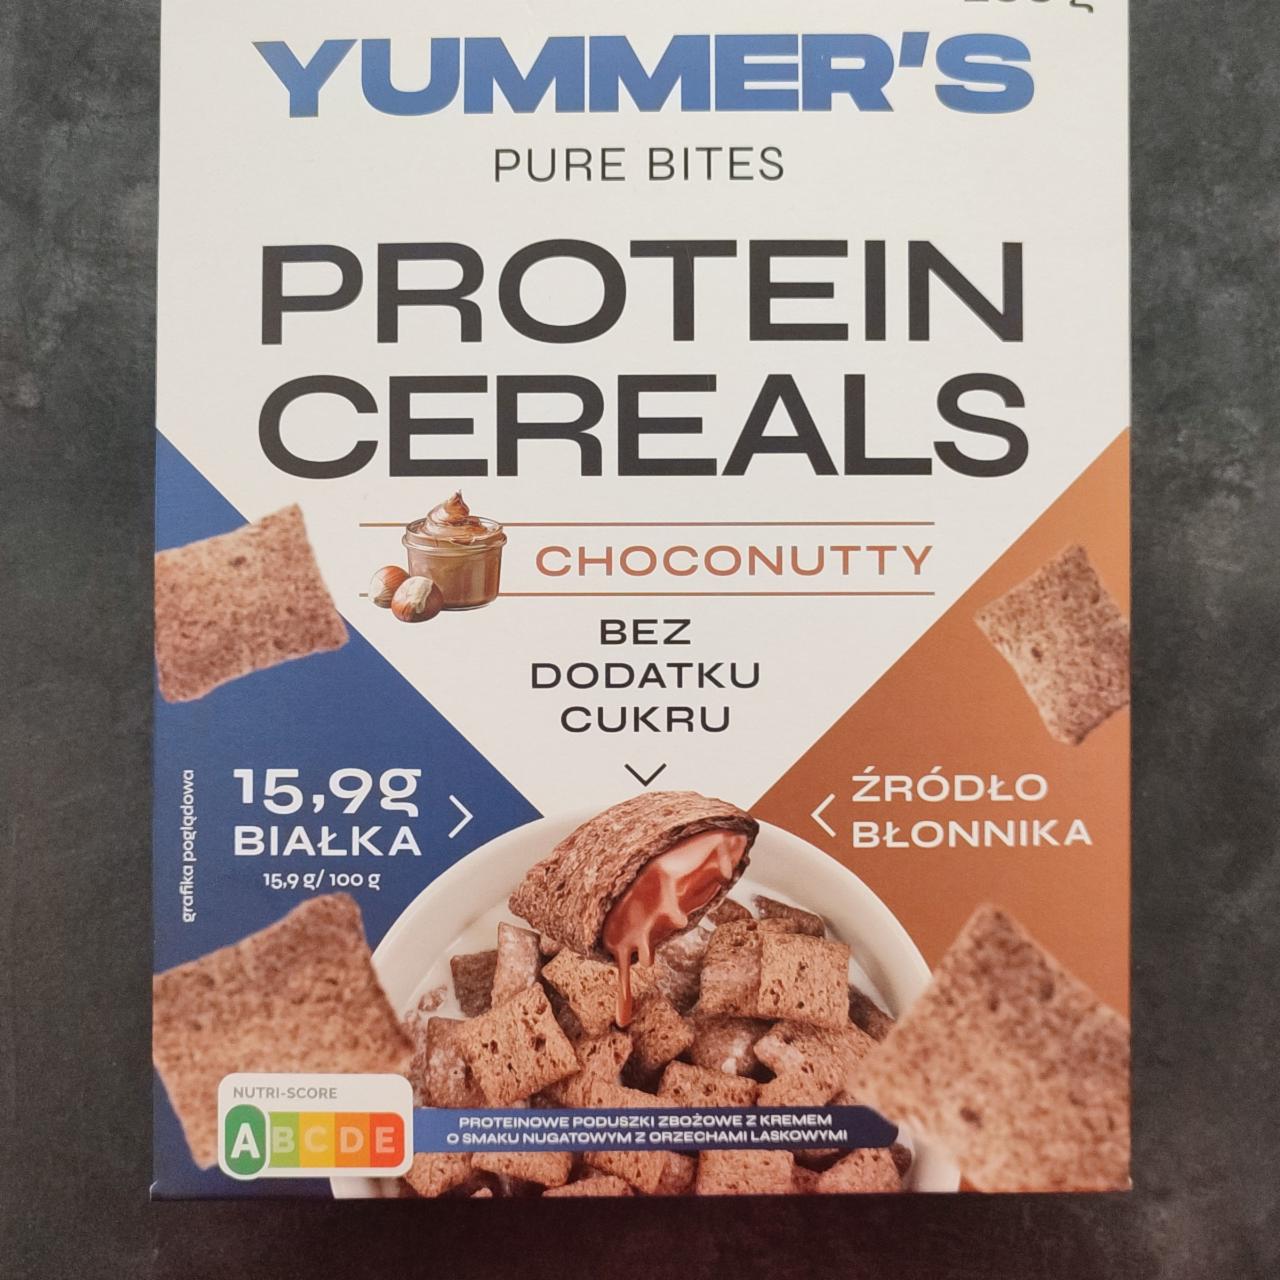 Фото - Pure bites protein cereals Choconutty Yummer’s